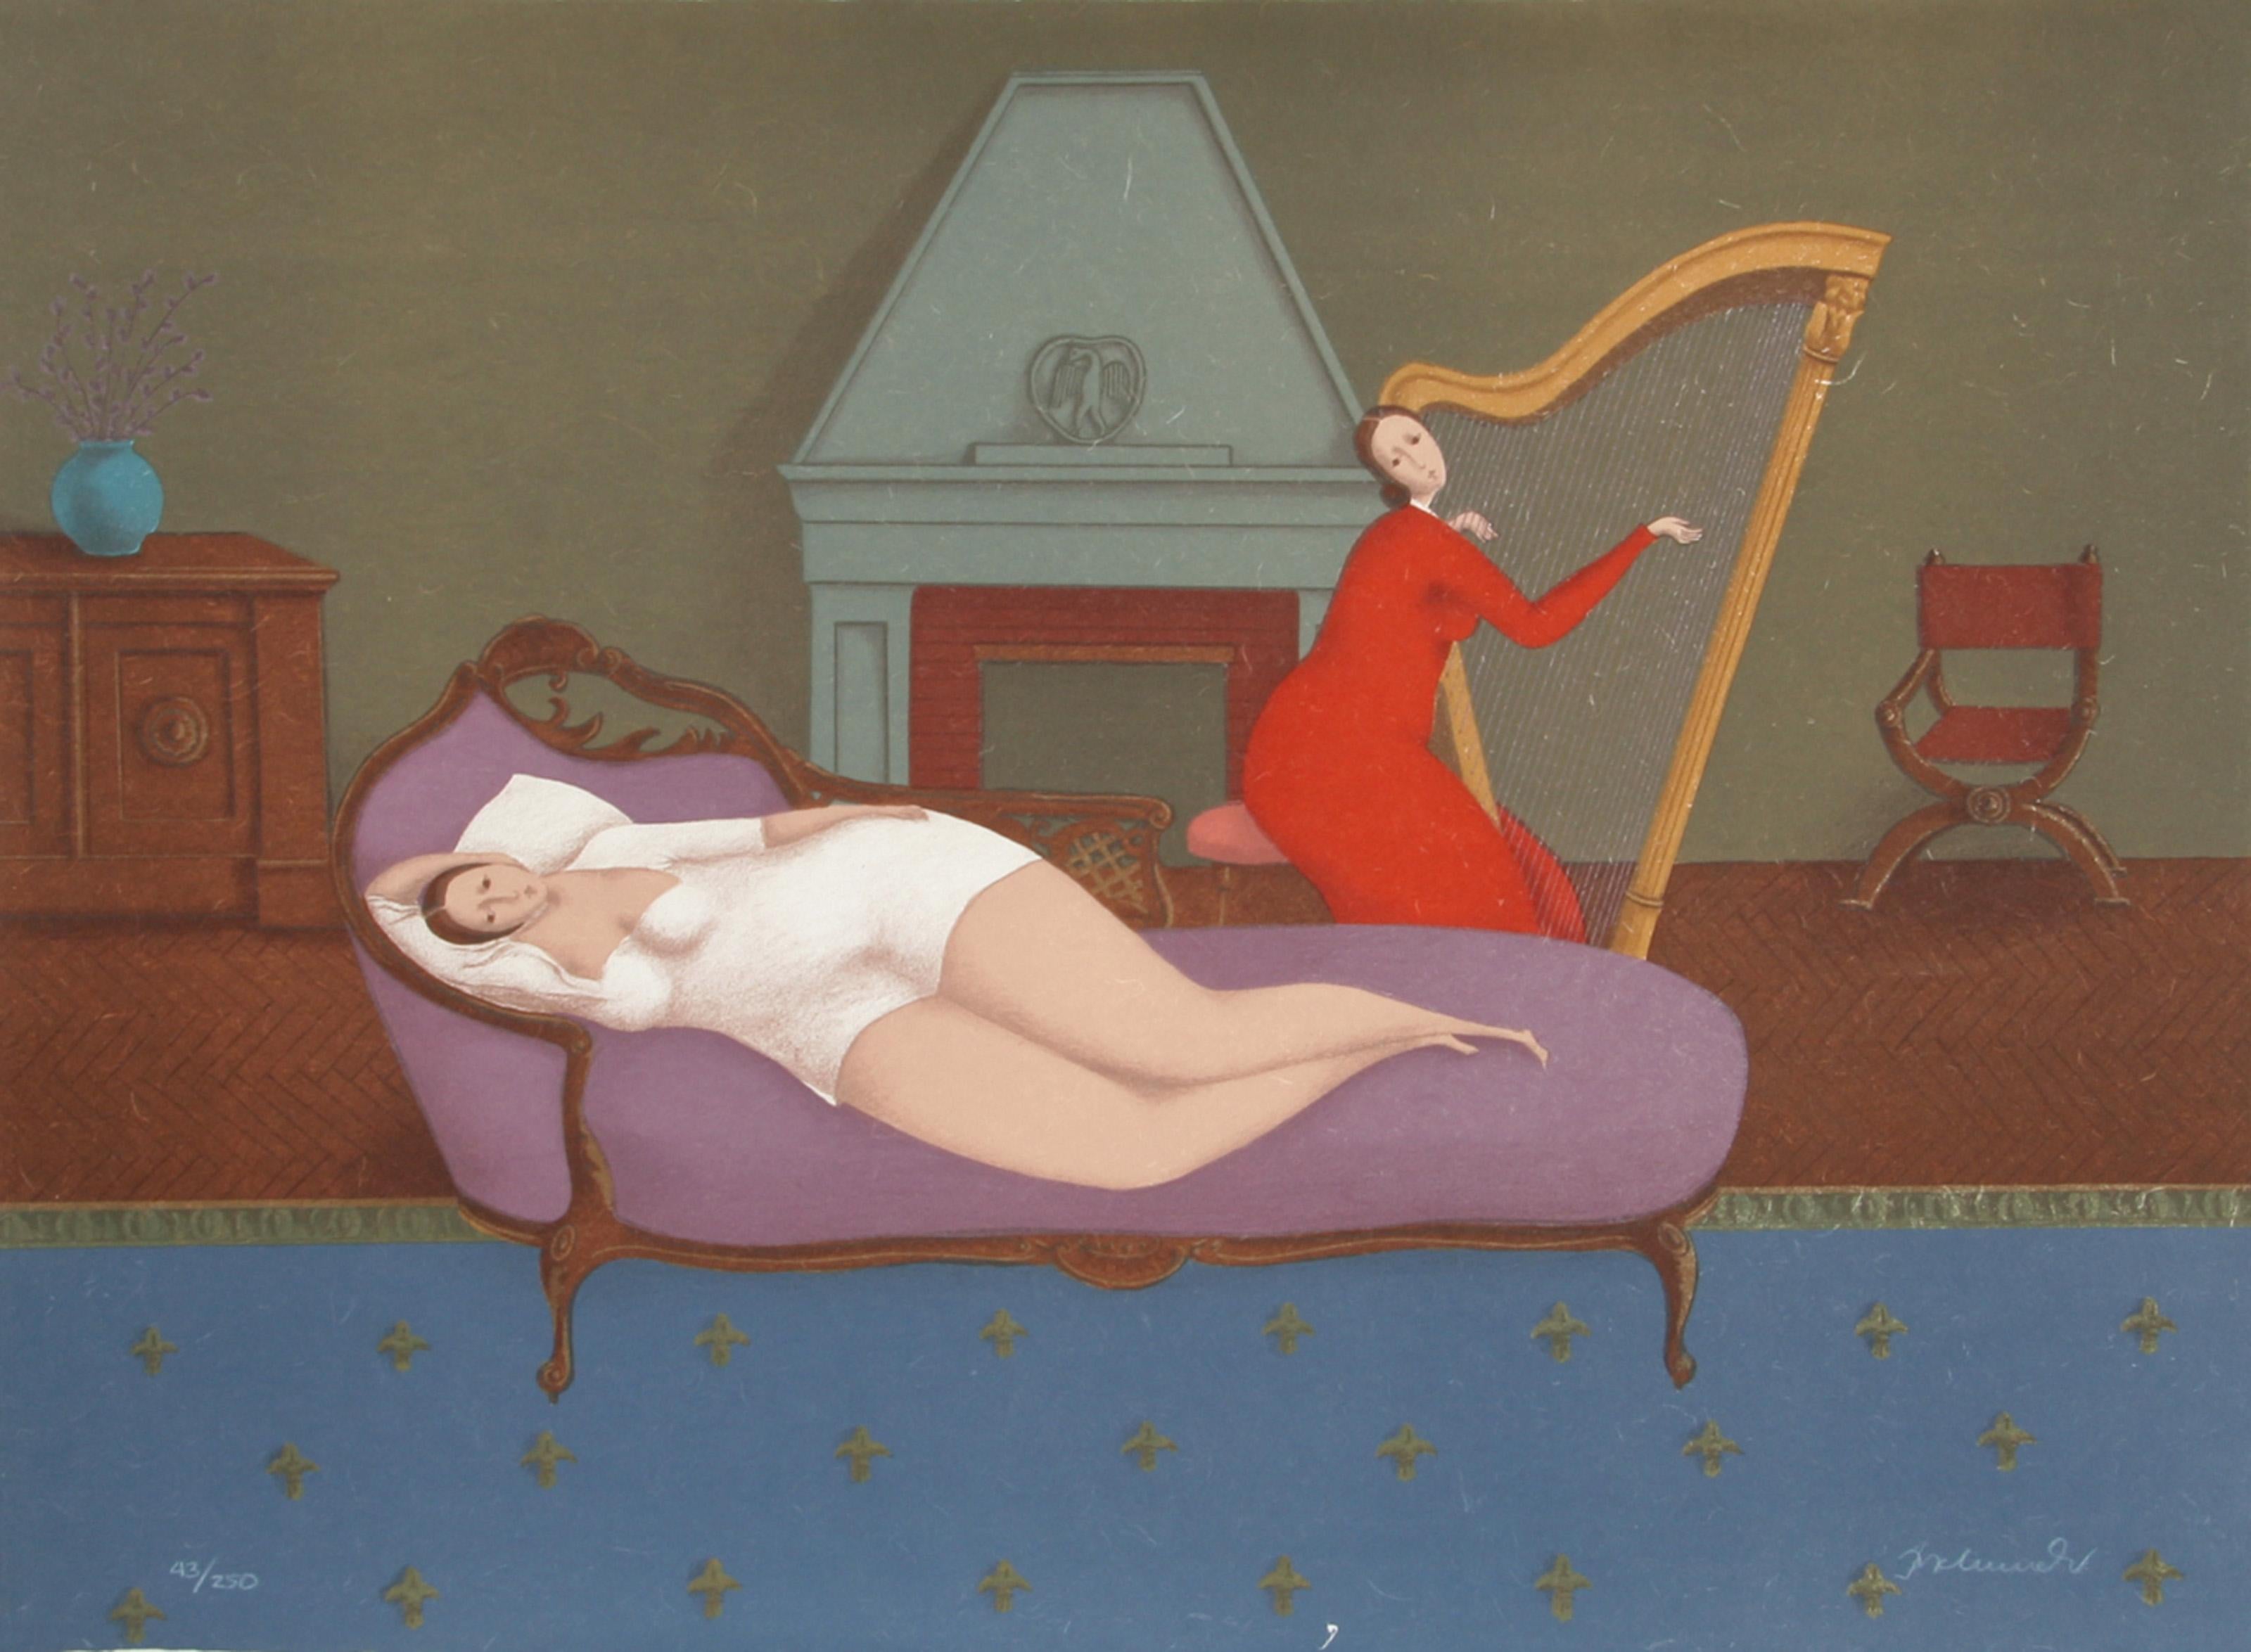 Branko Bahunek, Croatian (1935 - ) -  Lounging with Harp. Medium: Lithograph on Japon, Signed and numbered in pencil, Edition: 250, Size: 21.5 in. x 29 in. (54.61 cm x 73.66 cm) 